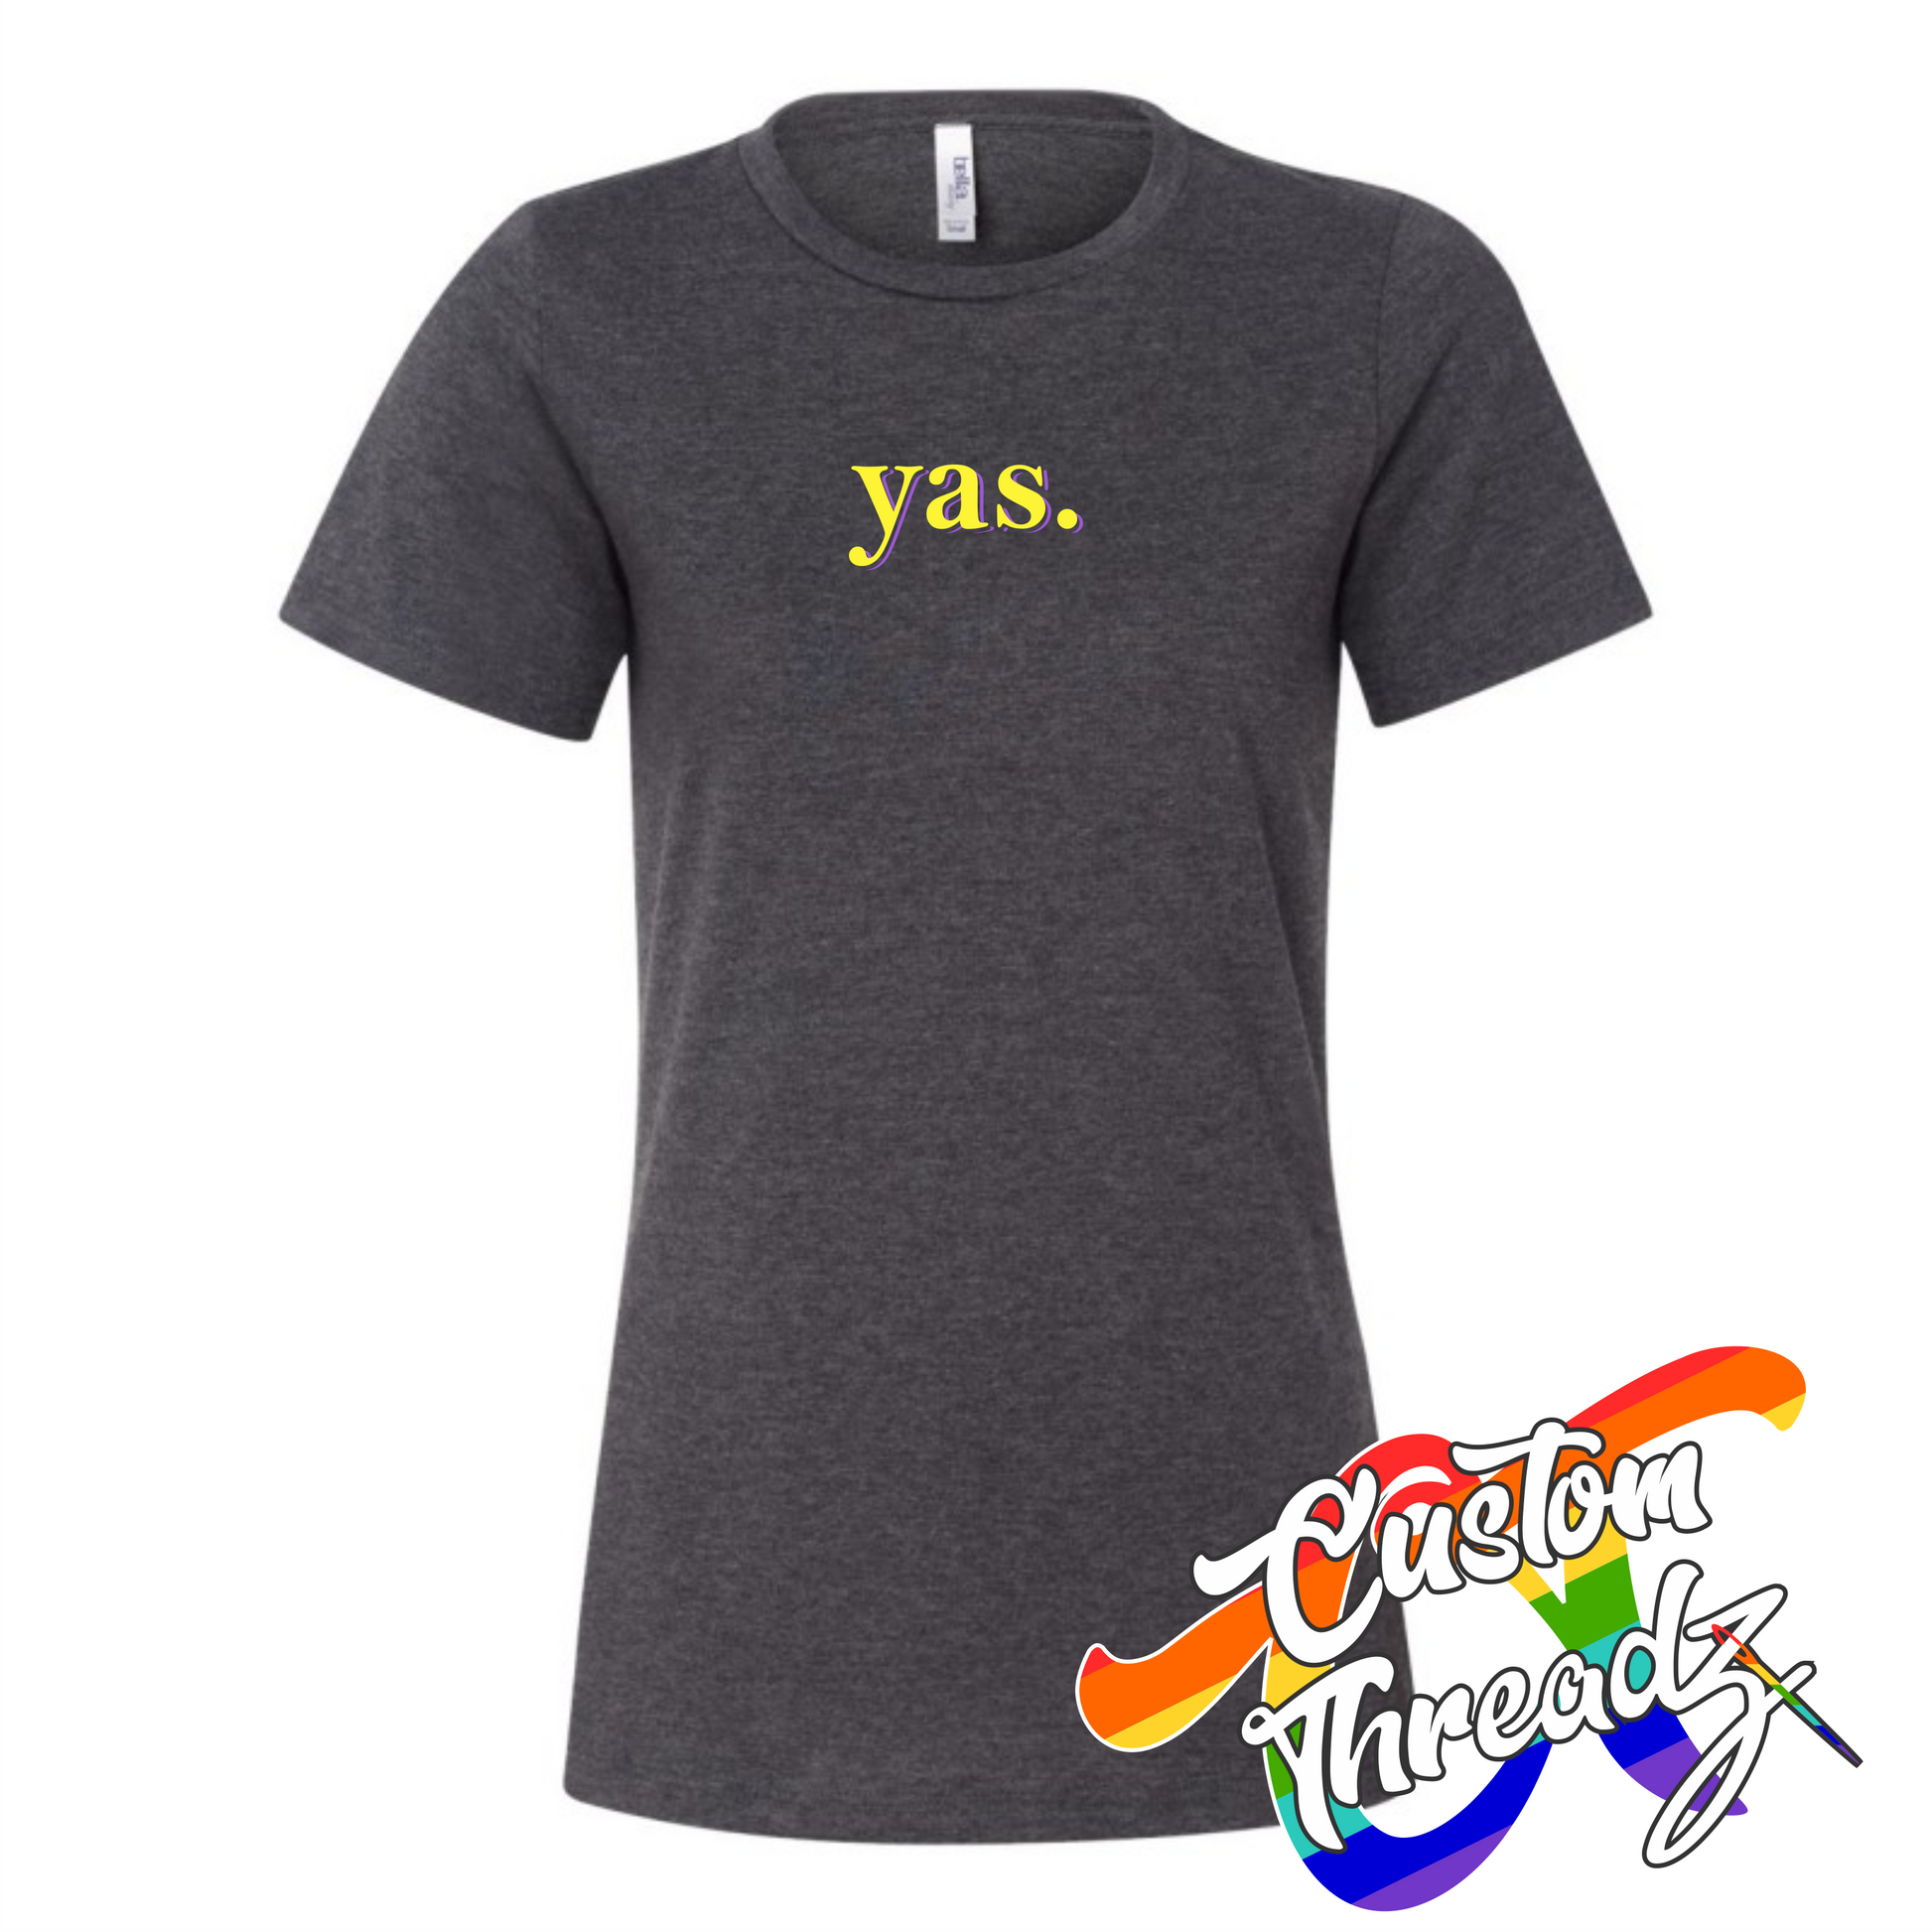 charcoal grey womens tee with yas DTG printed design